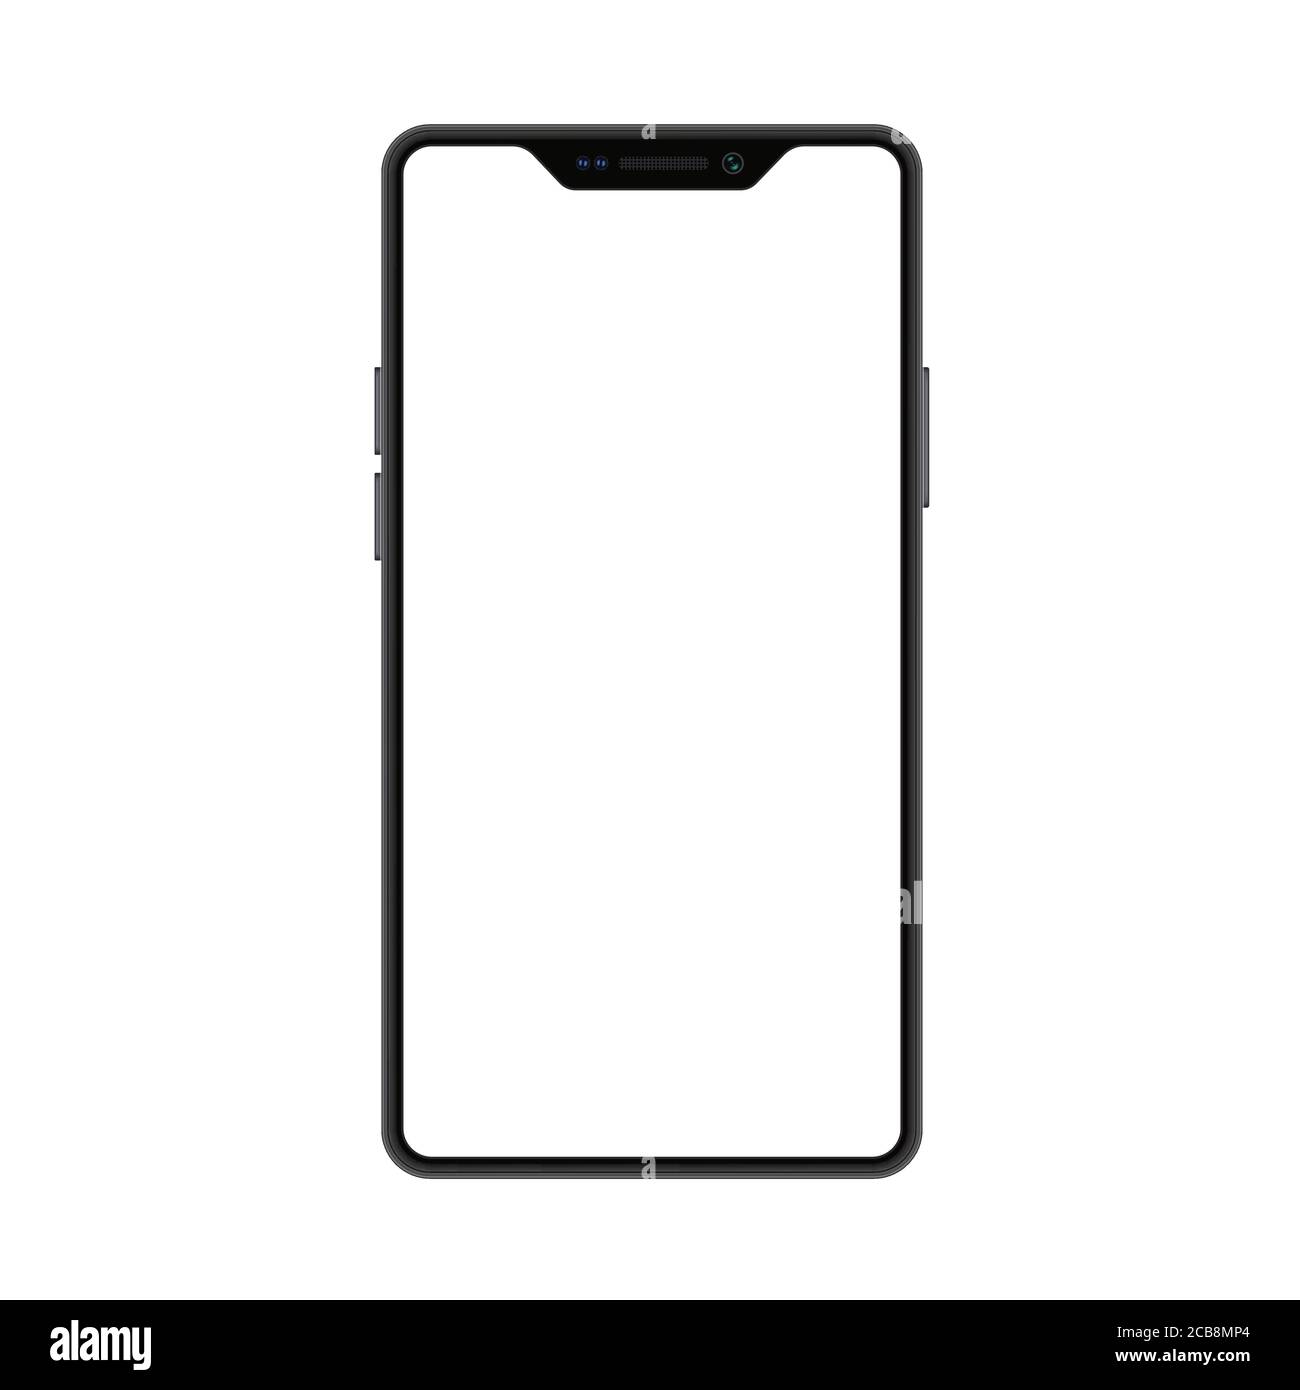 Trendy notch display design smartphone with blank screen. Realistic phone mockup for any project vector illustration Stock Vector